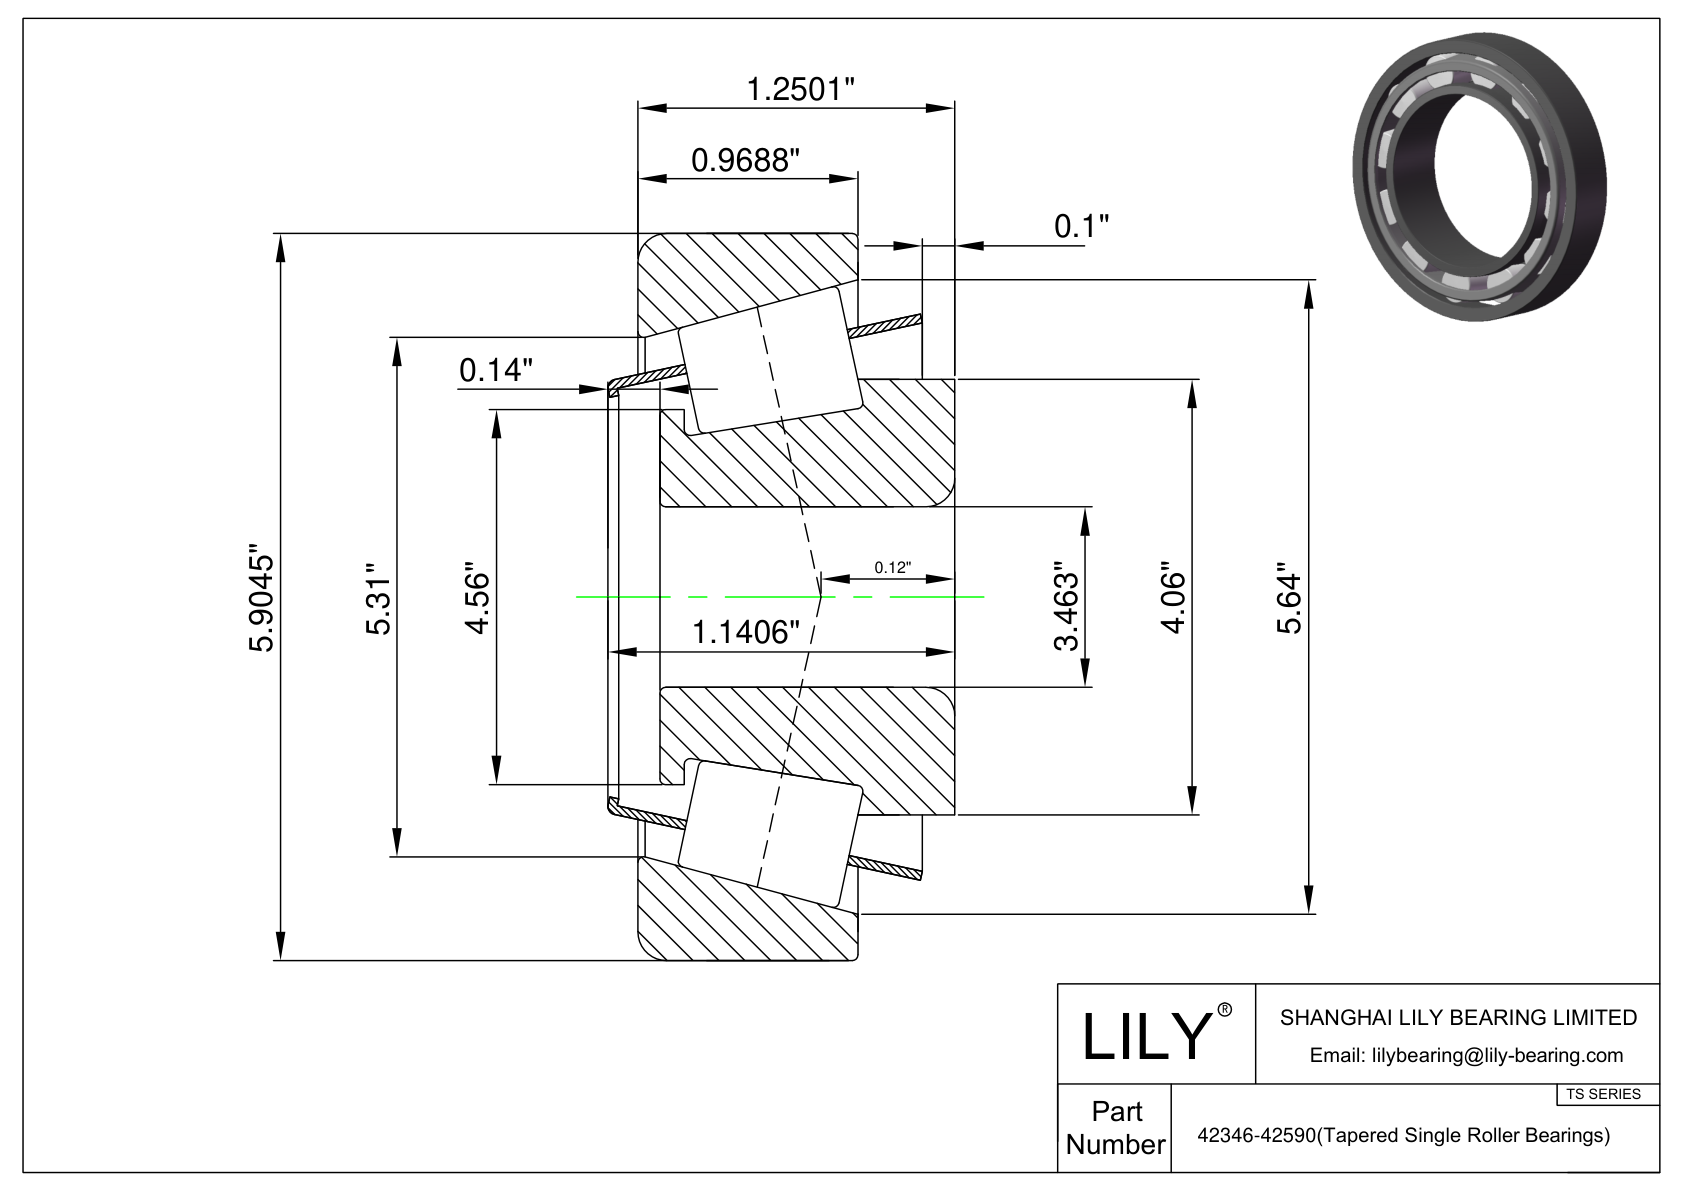 42346-42590 TS (Tapered Single Roller Bearings) (Imperial) cad drawing